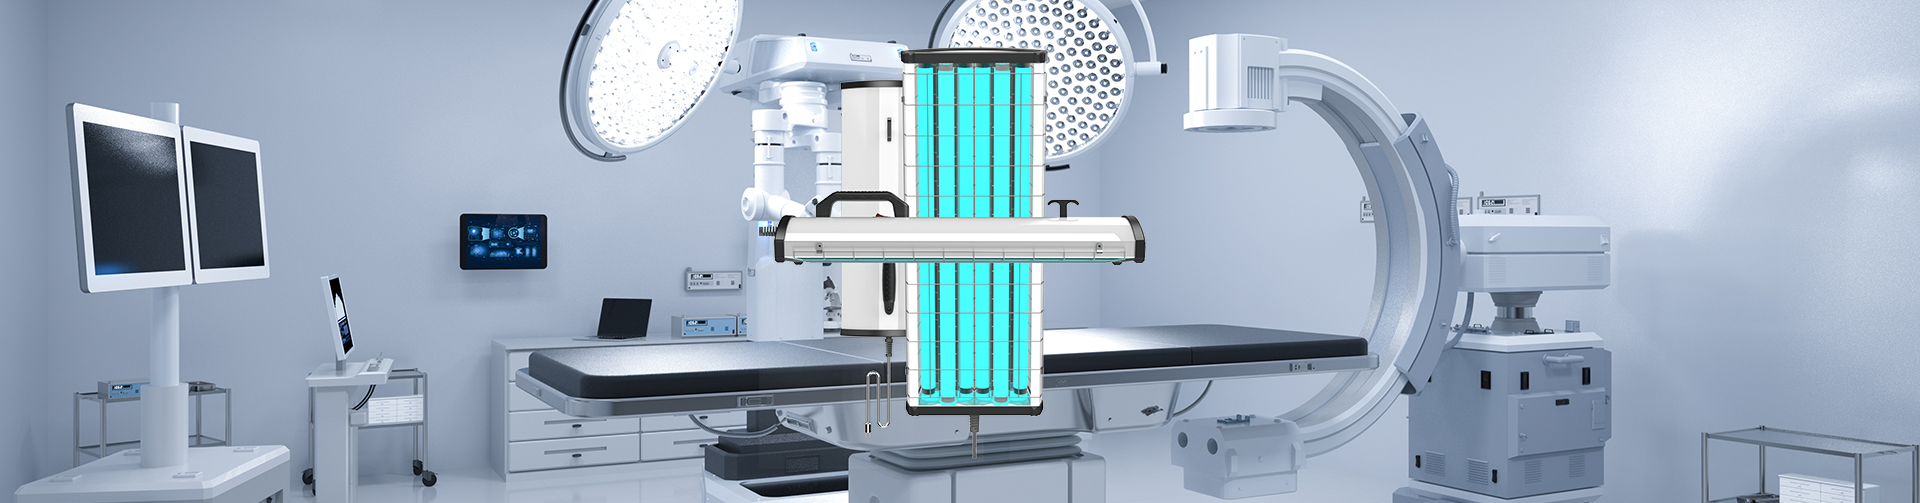 Ultraviolet Disinfection and Sanitation